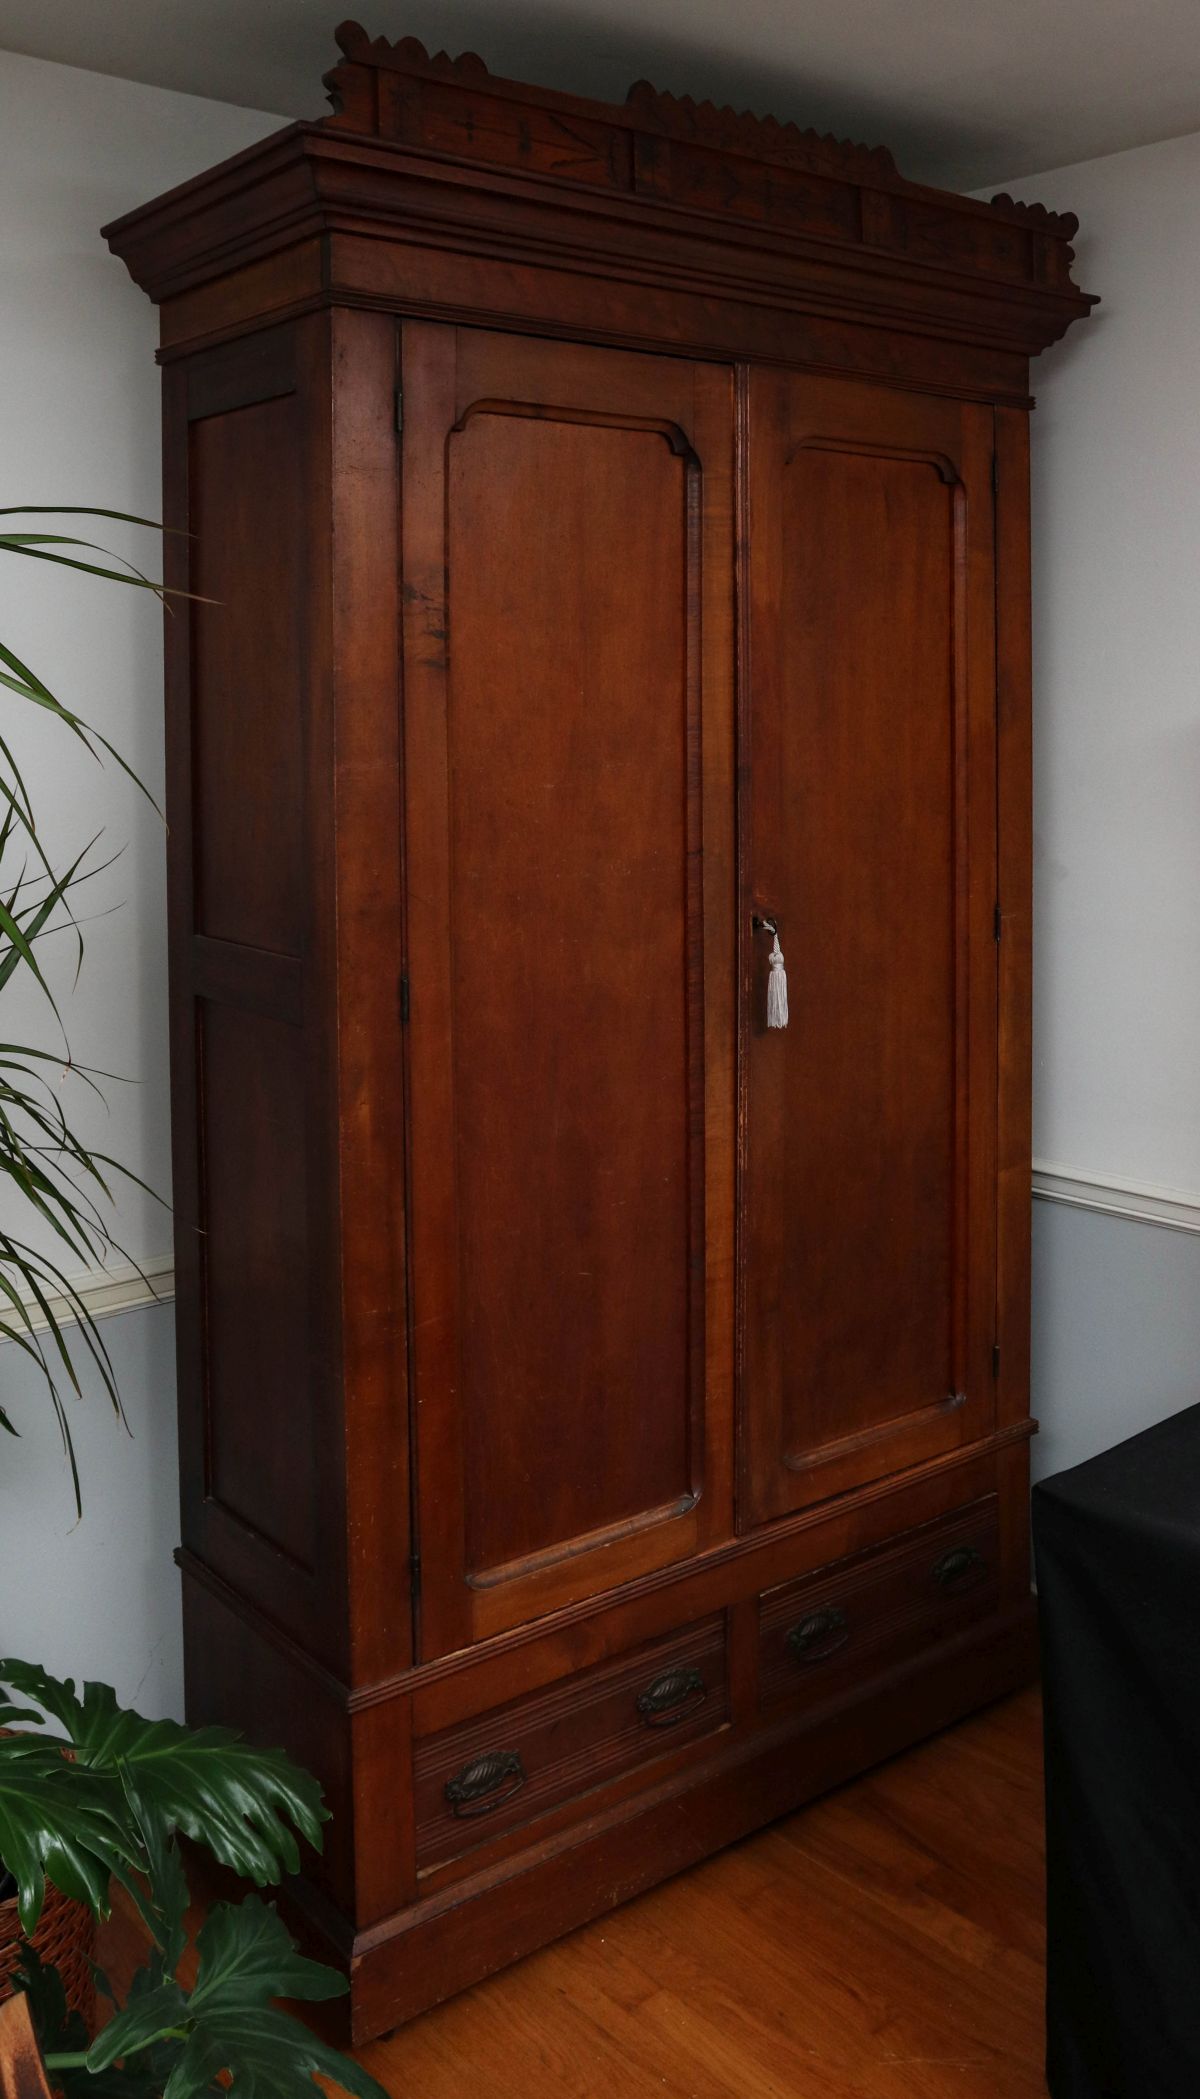 A STATELY VICTORIAN EASTLAKE STYLE TWO DOOR ARMOIRE